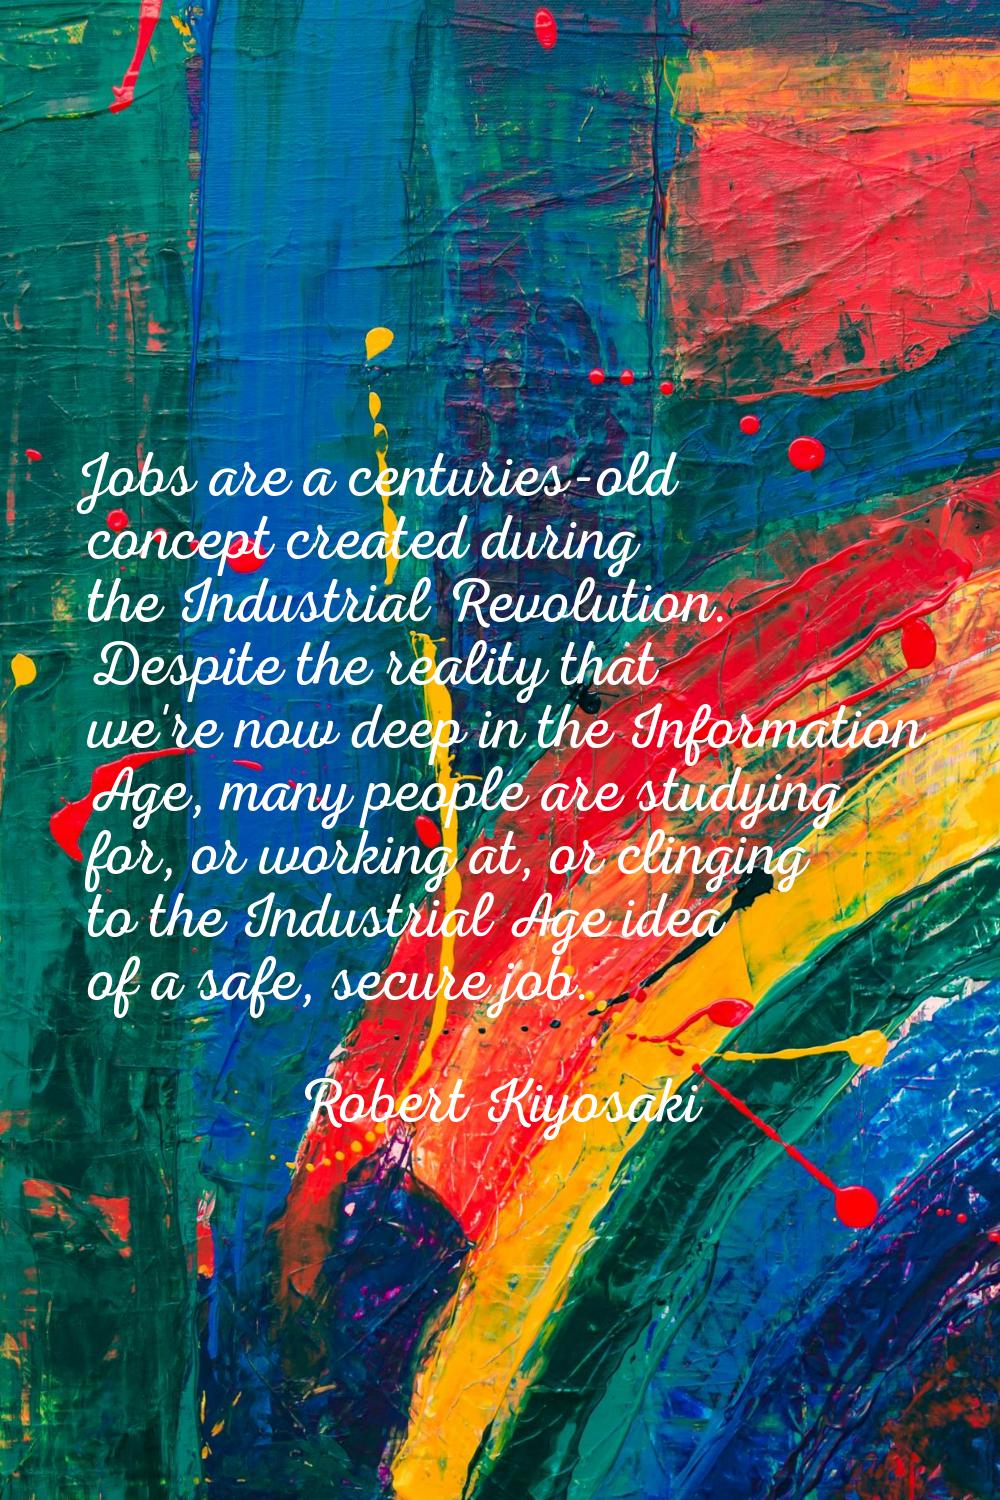 Jobs are a centuries-old concept created during the Industrial Revolution. Despite the reality that